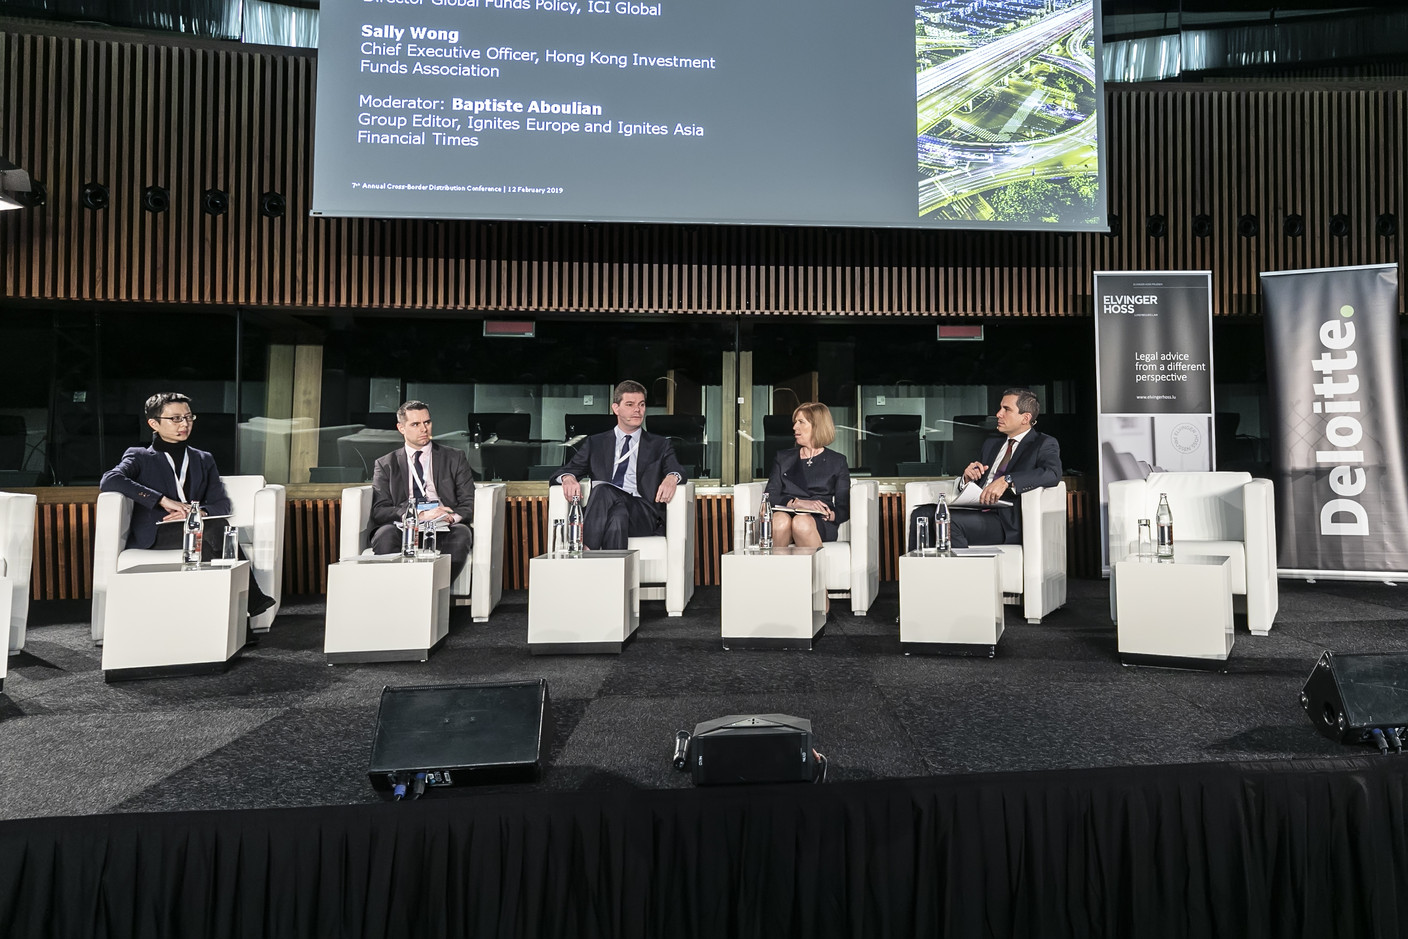 Sally Wong (Hong Kong Investment Funds Association), Giles Swan (ICI Global), Vincent Ingham (Efama), Sheila Nicoll (Schroders) et Baptiste Aboulian (Ignites Europe & Ignites Asia) Blitz Photo Agency